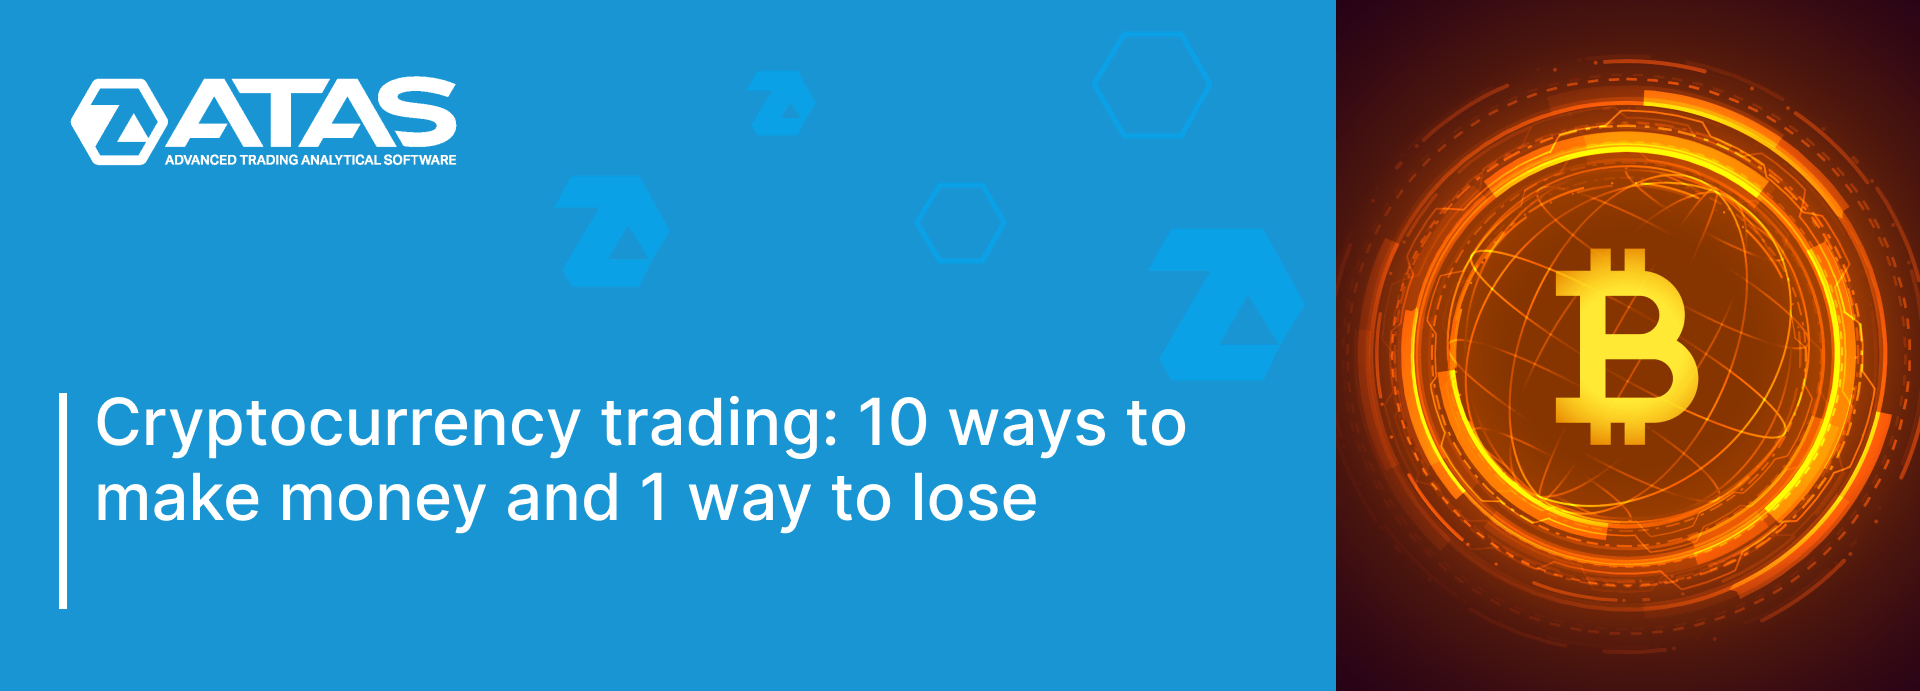 Cryptocurrency trading - 10 ways to make money and 1 way to lose